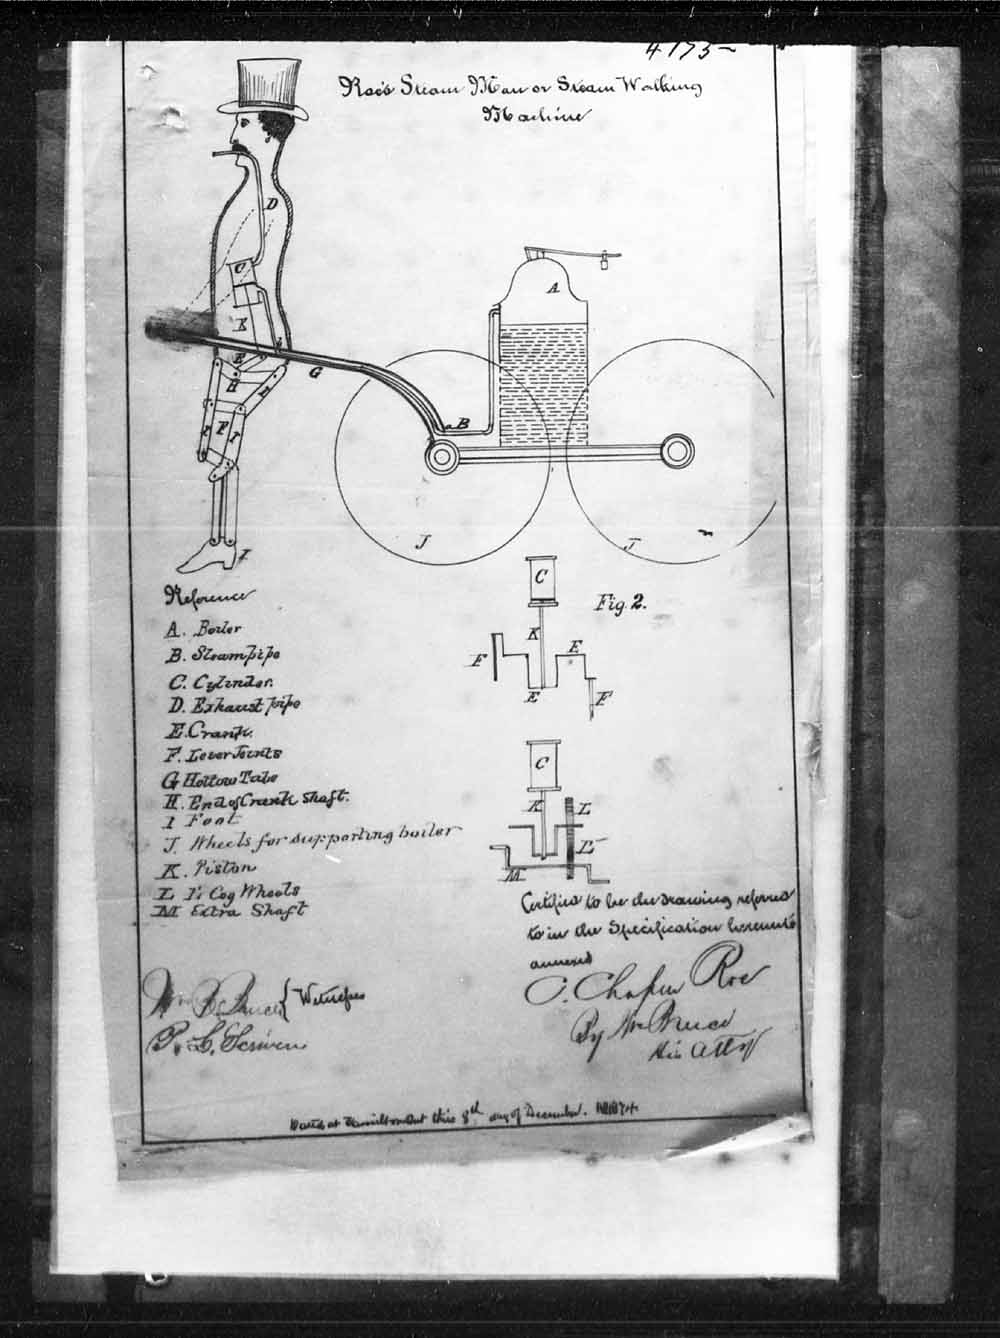 Digitized page of Canadian Patents, 1869-1919 for Image No.: e003257991